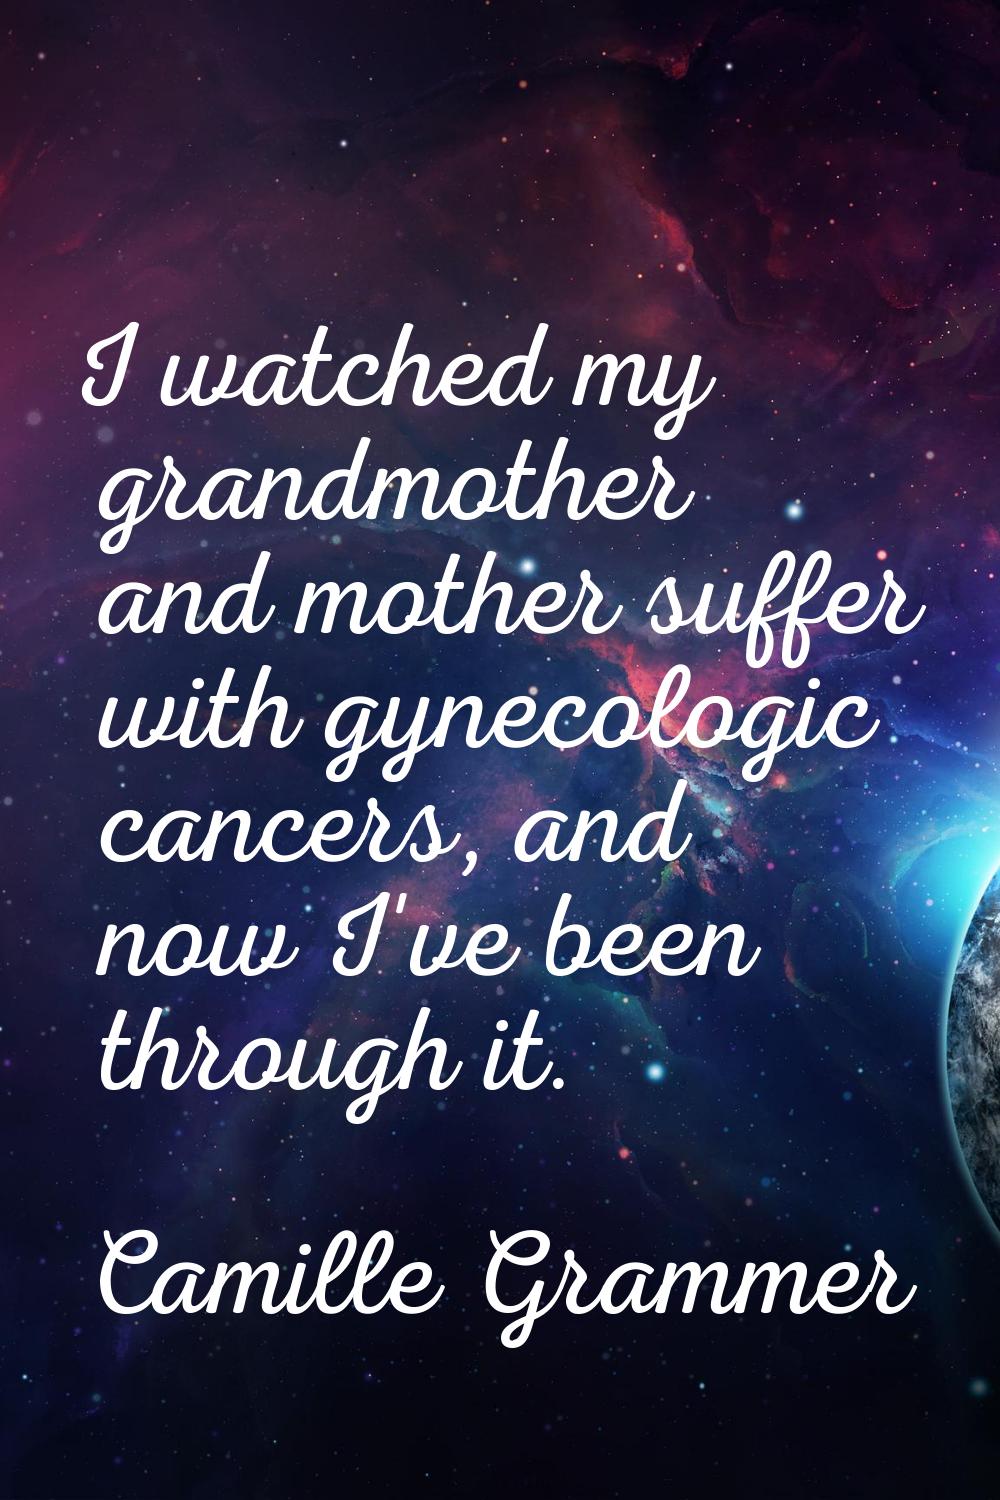 I watched my grandmother and mother suffer with gynecologic cancers, and now I've been through it.